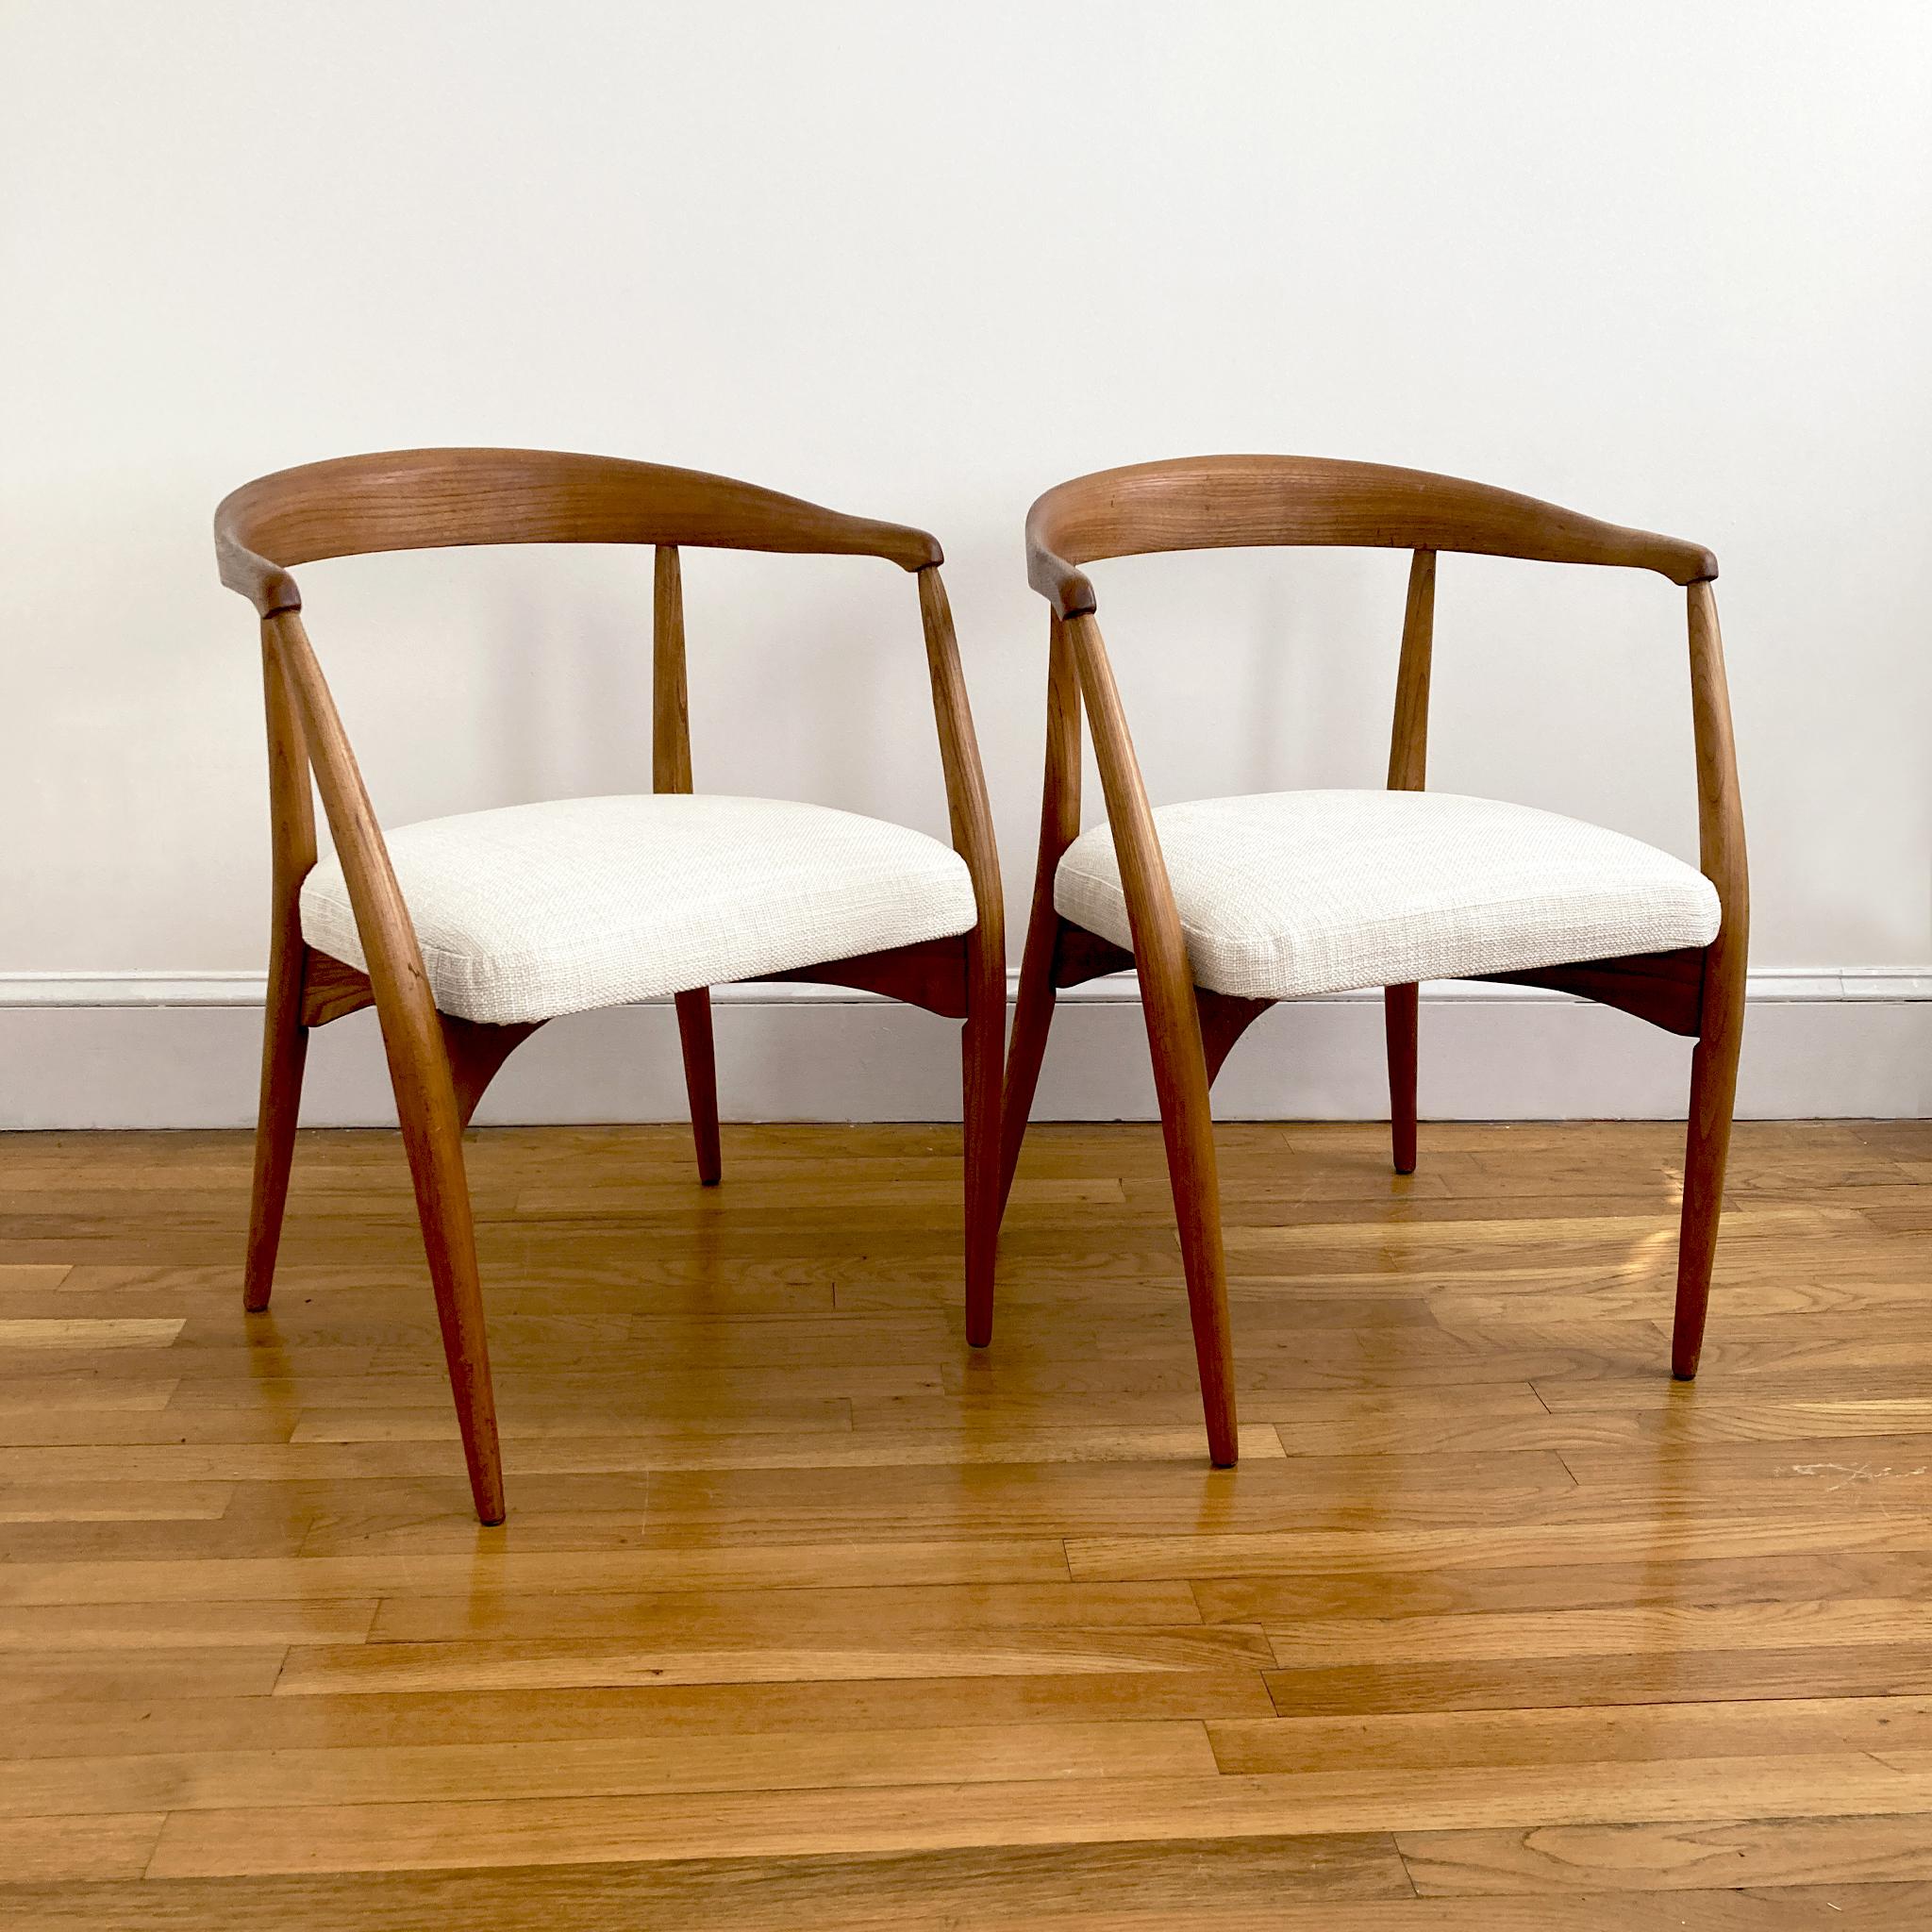 Designed by Lawrence Peabody for Richardson Nemschoff, pair of elegant armchairs. Made from oak and reupholstered in a chic, minimal ivory tweed. Chairs are in good condition, with some light scuffs on the legs due to age. Structurally sound, no